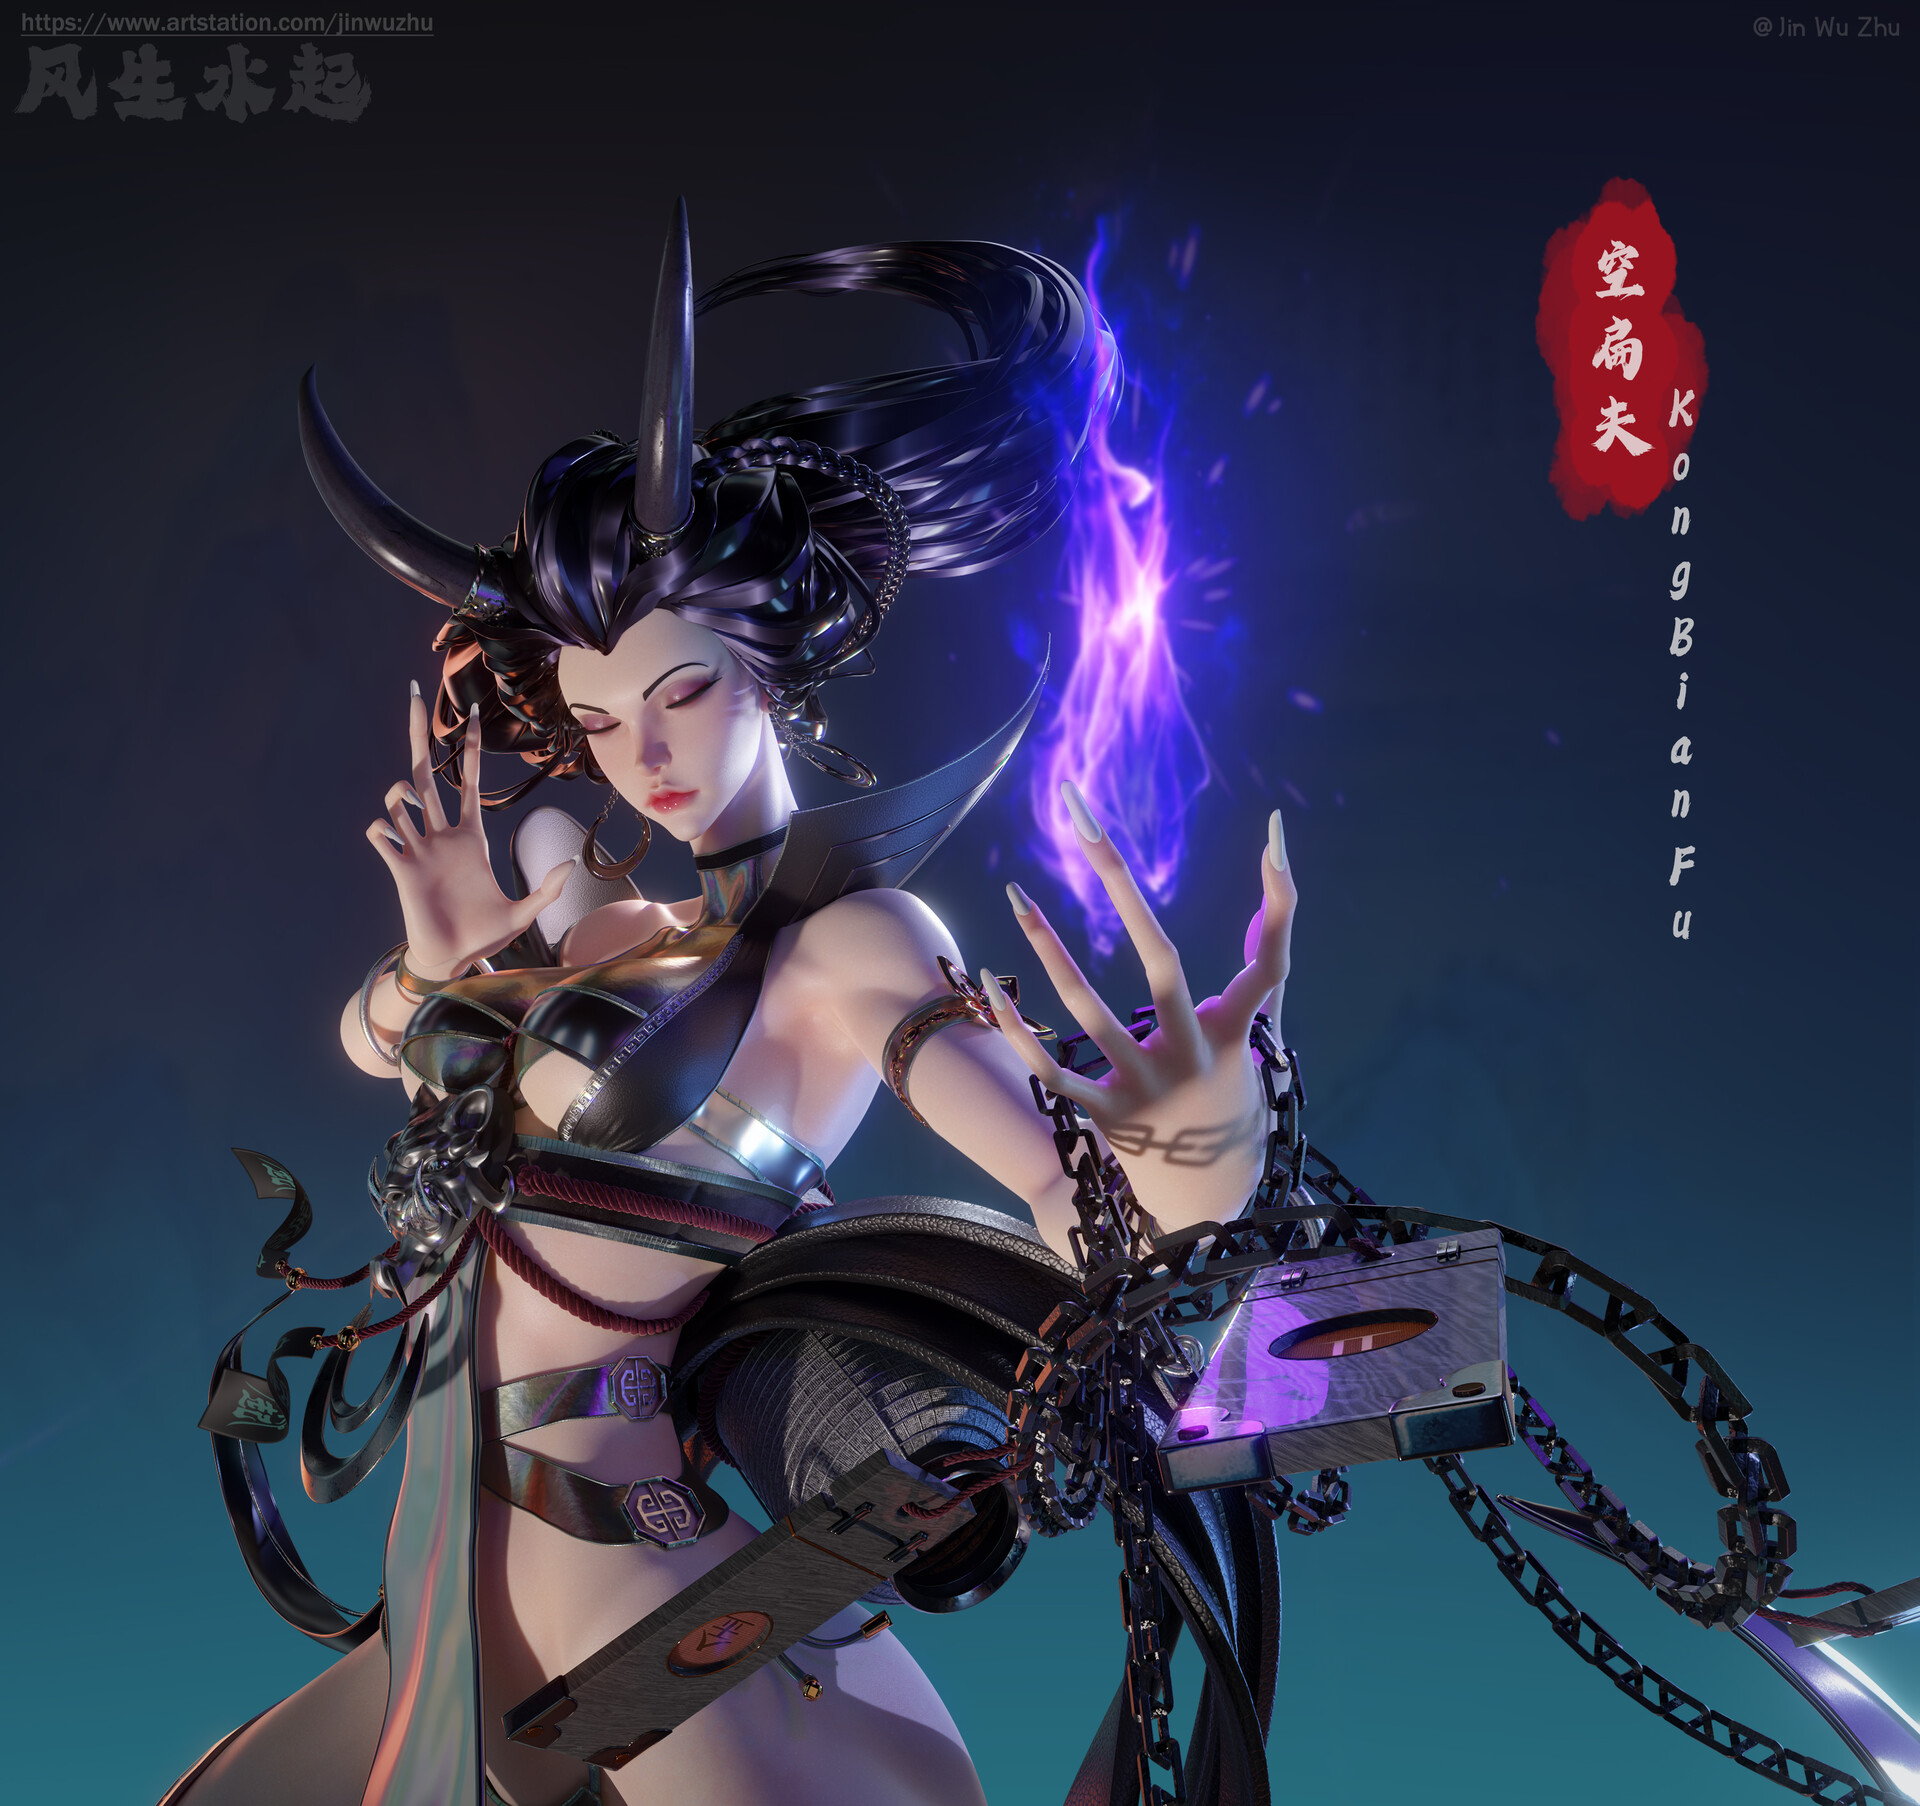 General 1920x1806 Jin WuZhu women spell skimpy clothes simple background CGI closed eyes fantasy art fantasy girl long hair horns closed mouth long nails white nails chains slim body big boobs watermarked digital art